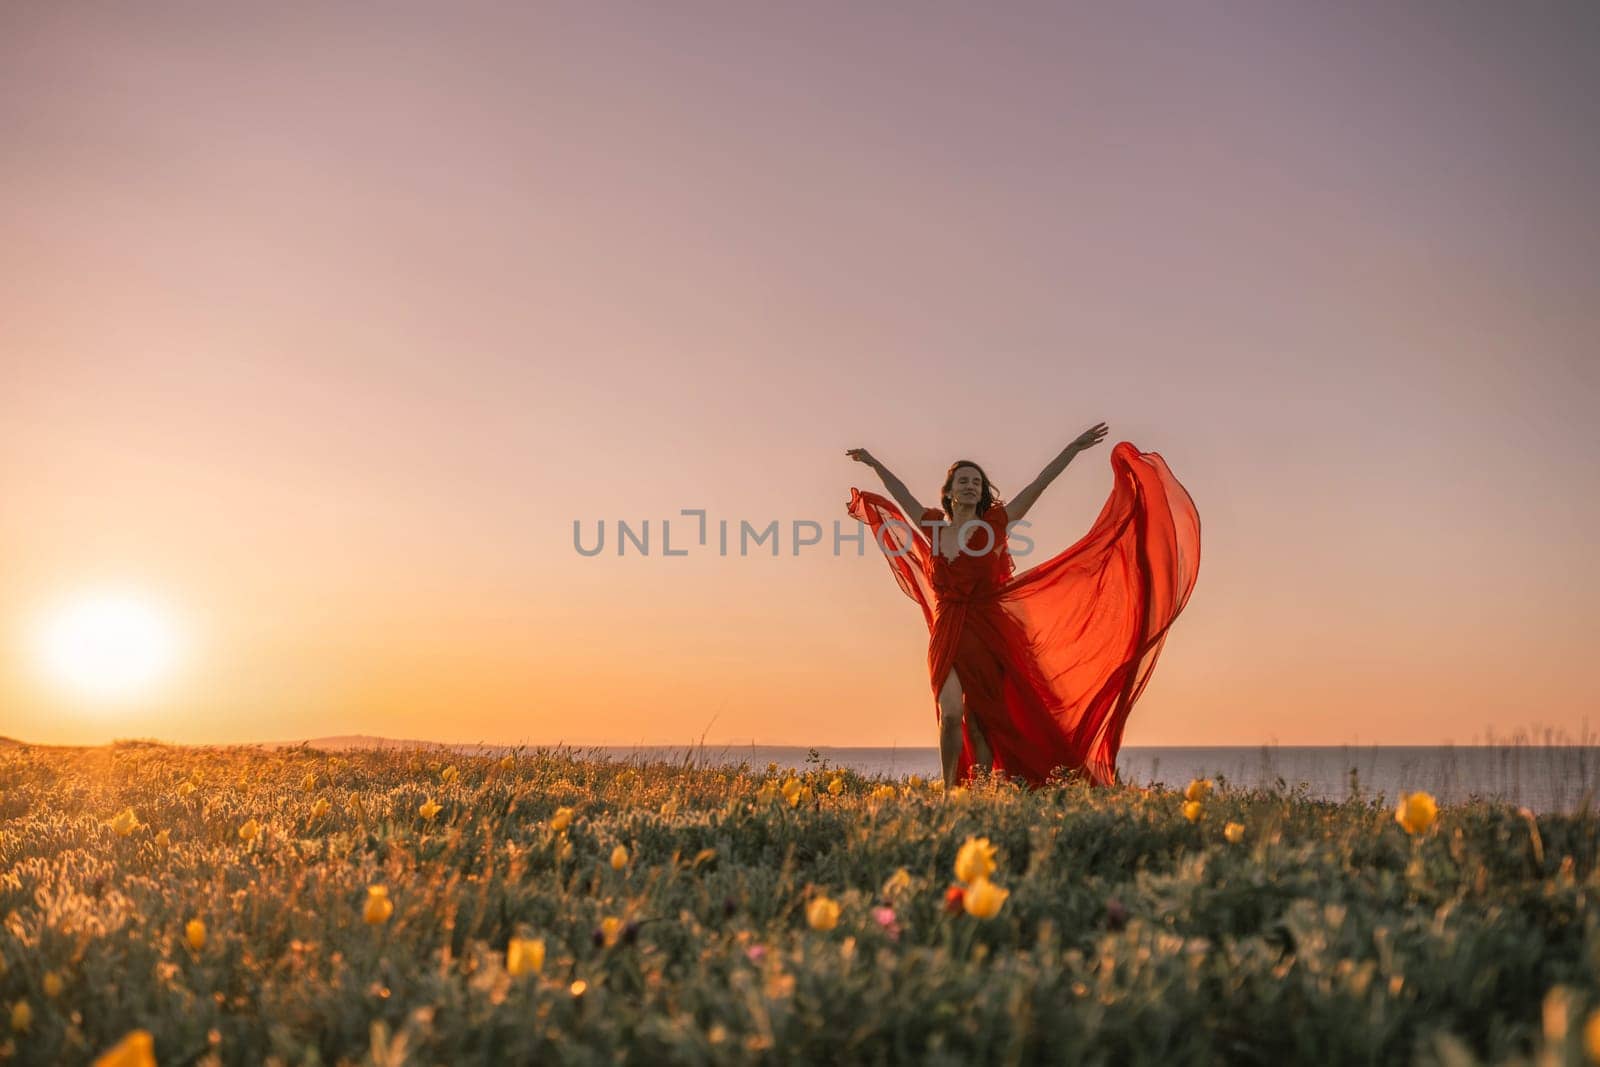 woman red dress is standing on a grassy hill overlooking the ocean. The sky is a beautiful mix of orange and pink hues, creating a serene and romantic atmosphere